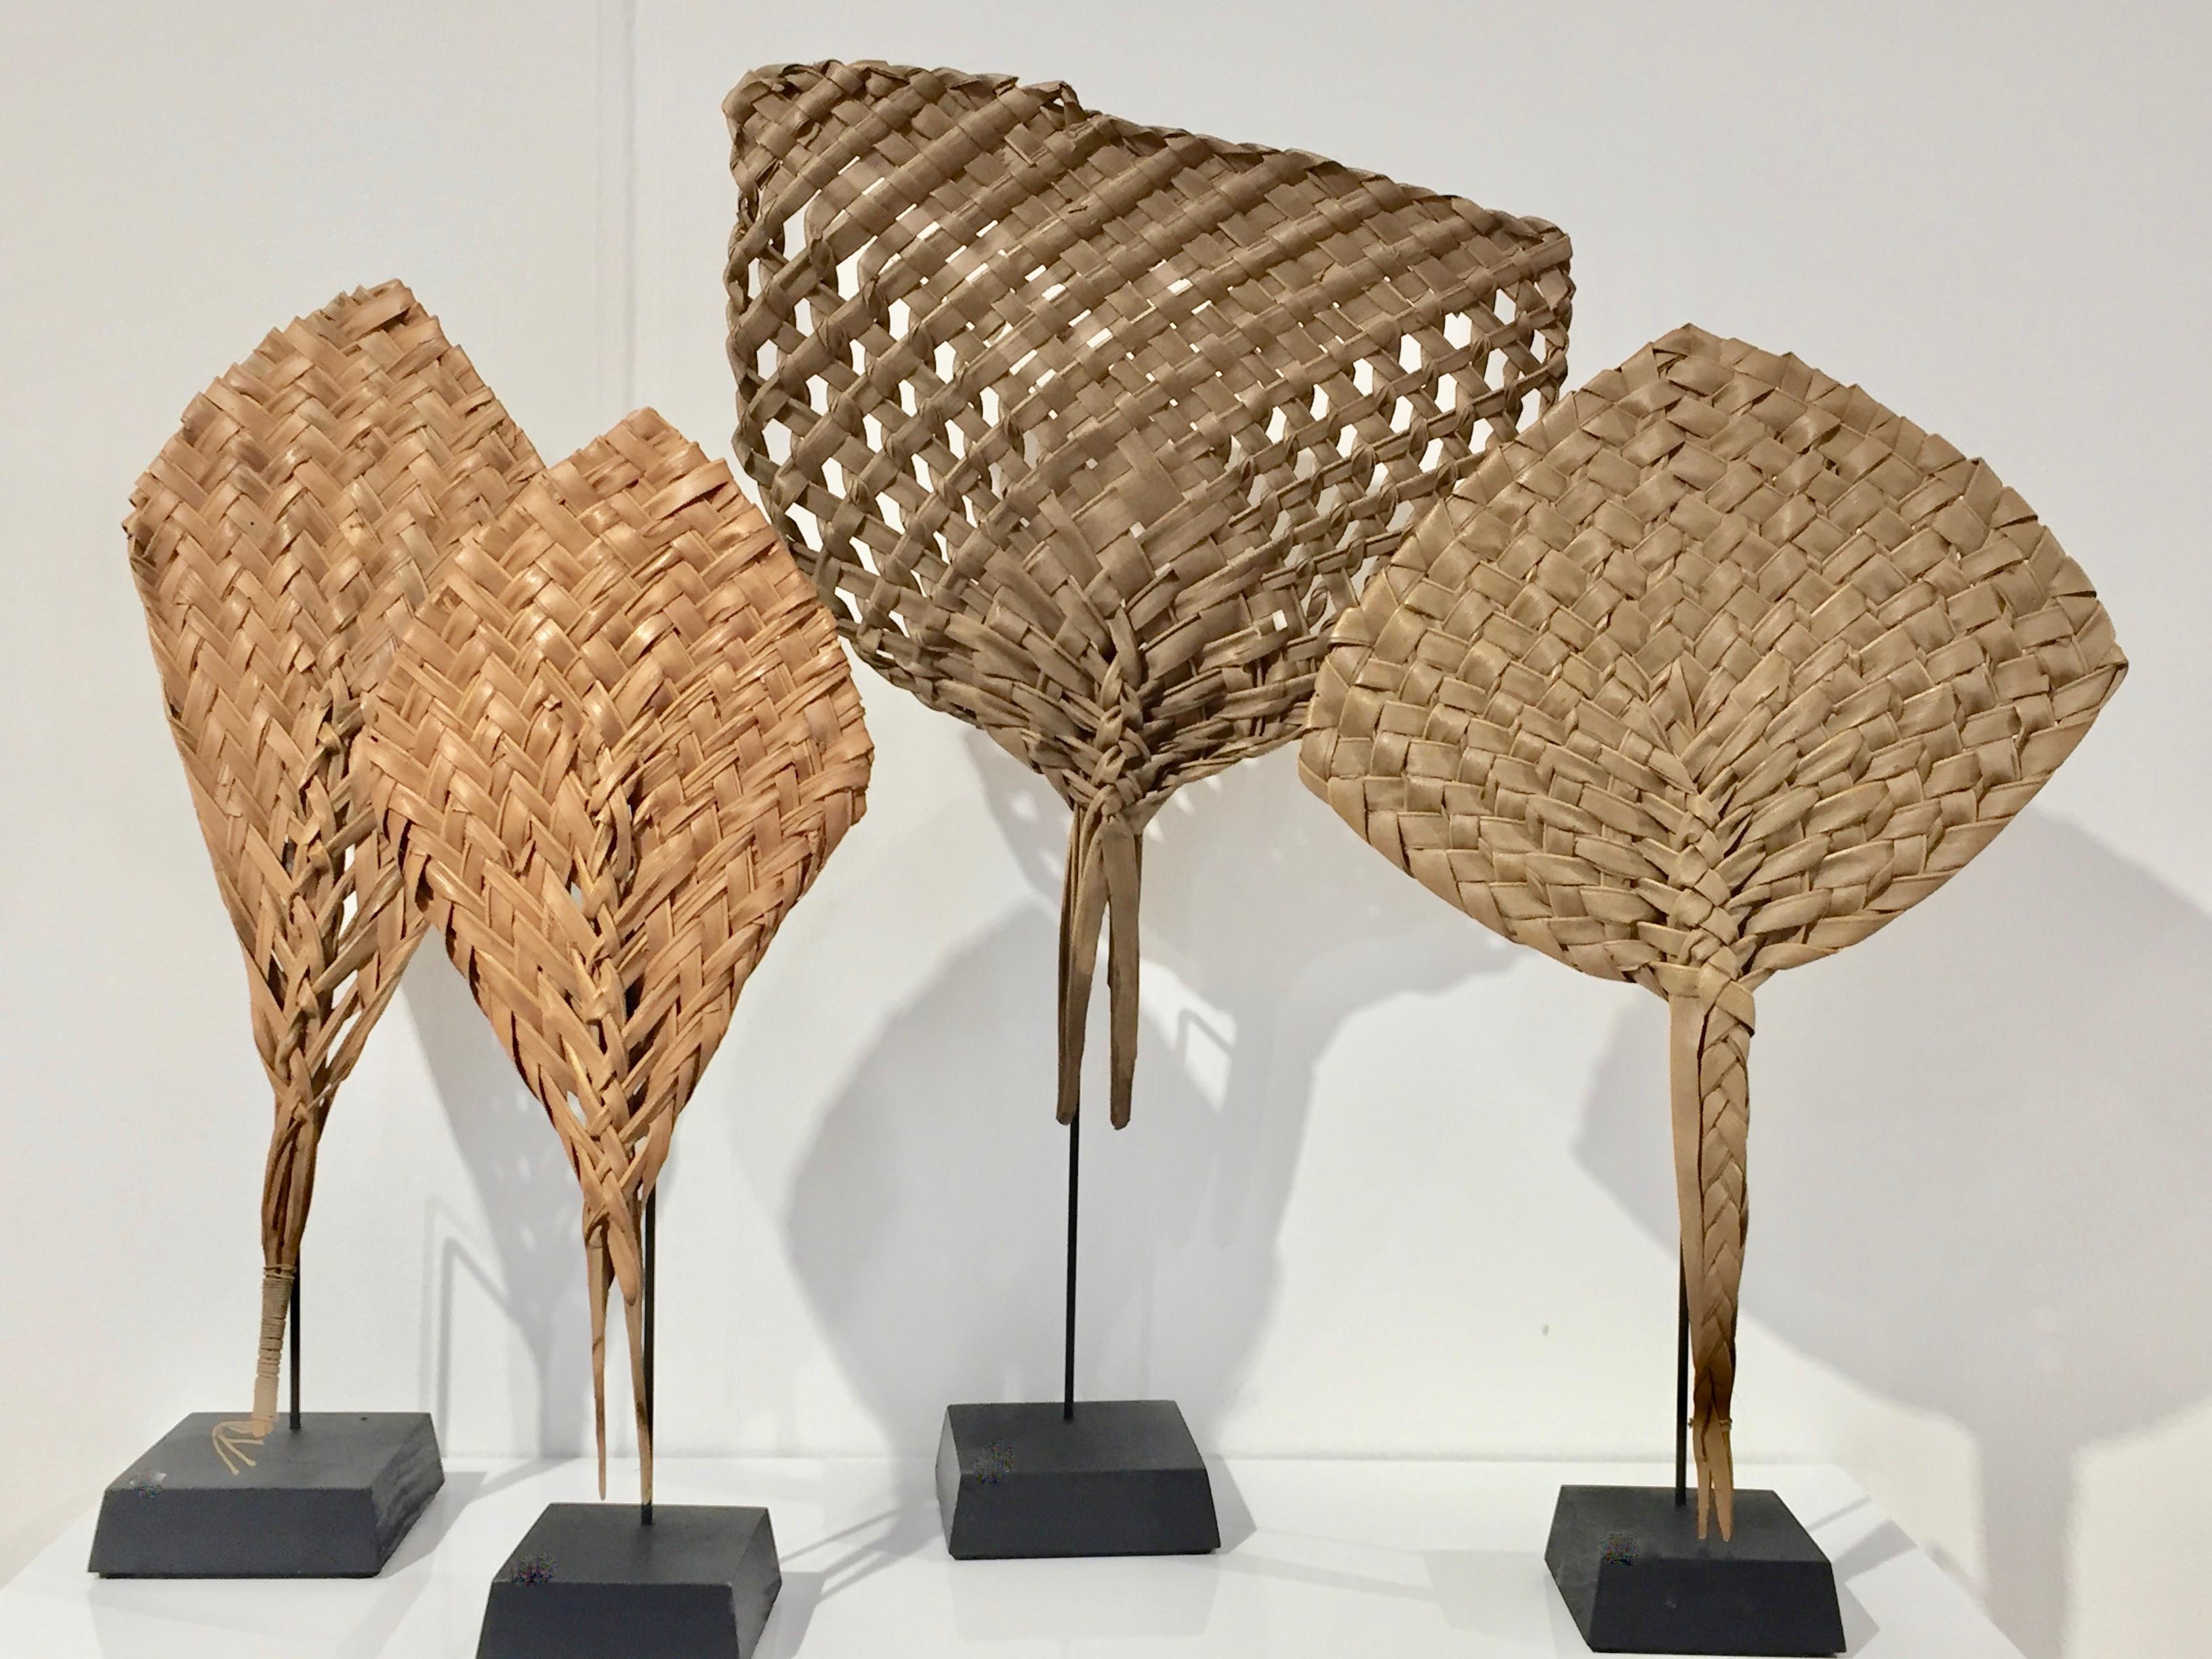 A Tongan palm leaf fan. Provenance, the Melanesian Mission. Founded in 1849 by George Augustus Selwyn. The work of the Mission was primarily centred in Solomon Islands and Vanuatu, but did have material from other Pacific Islands. Fans sold